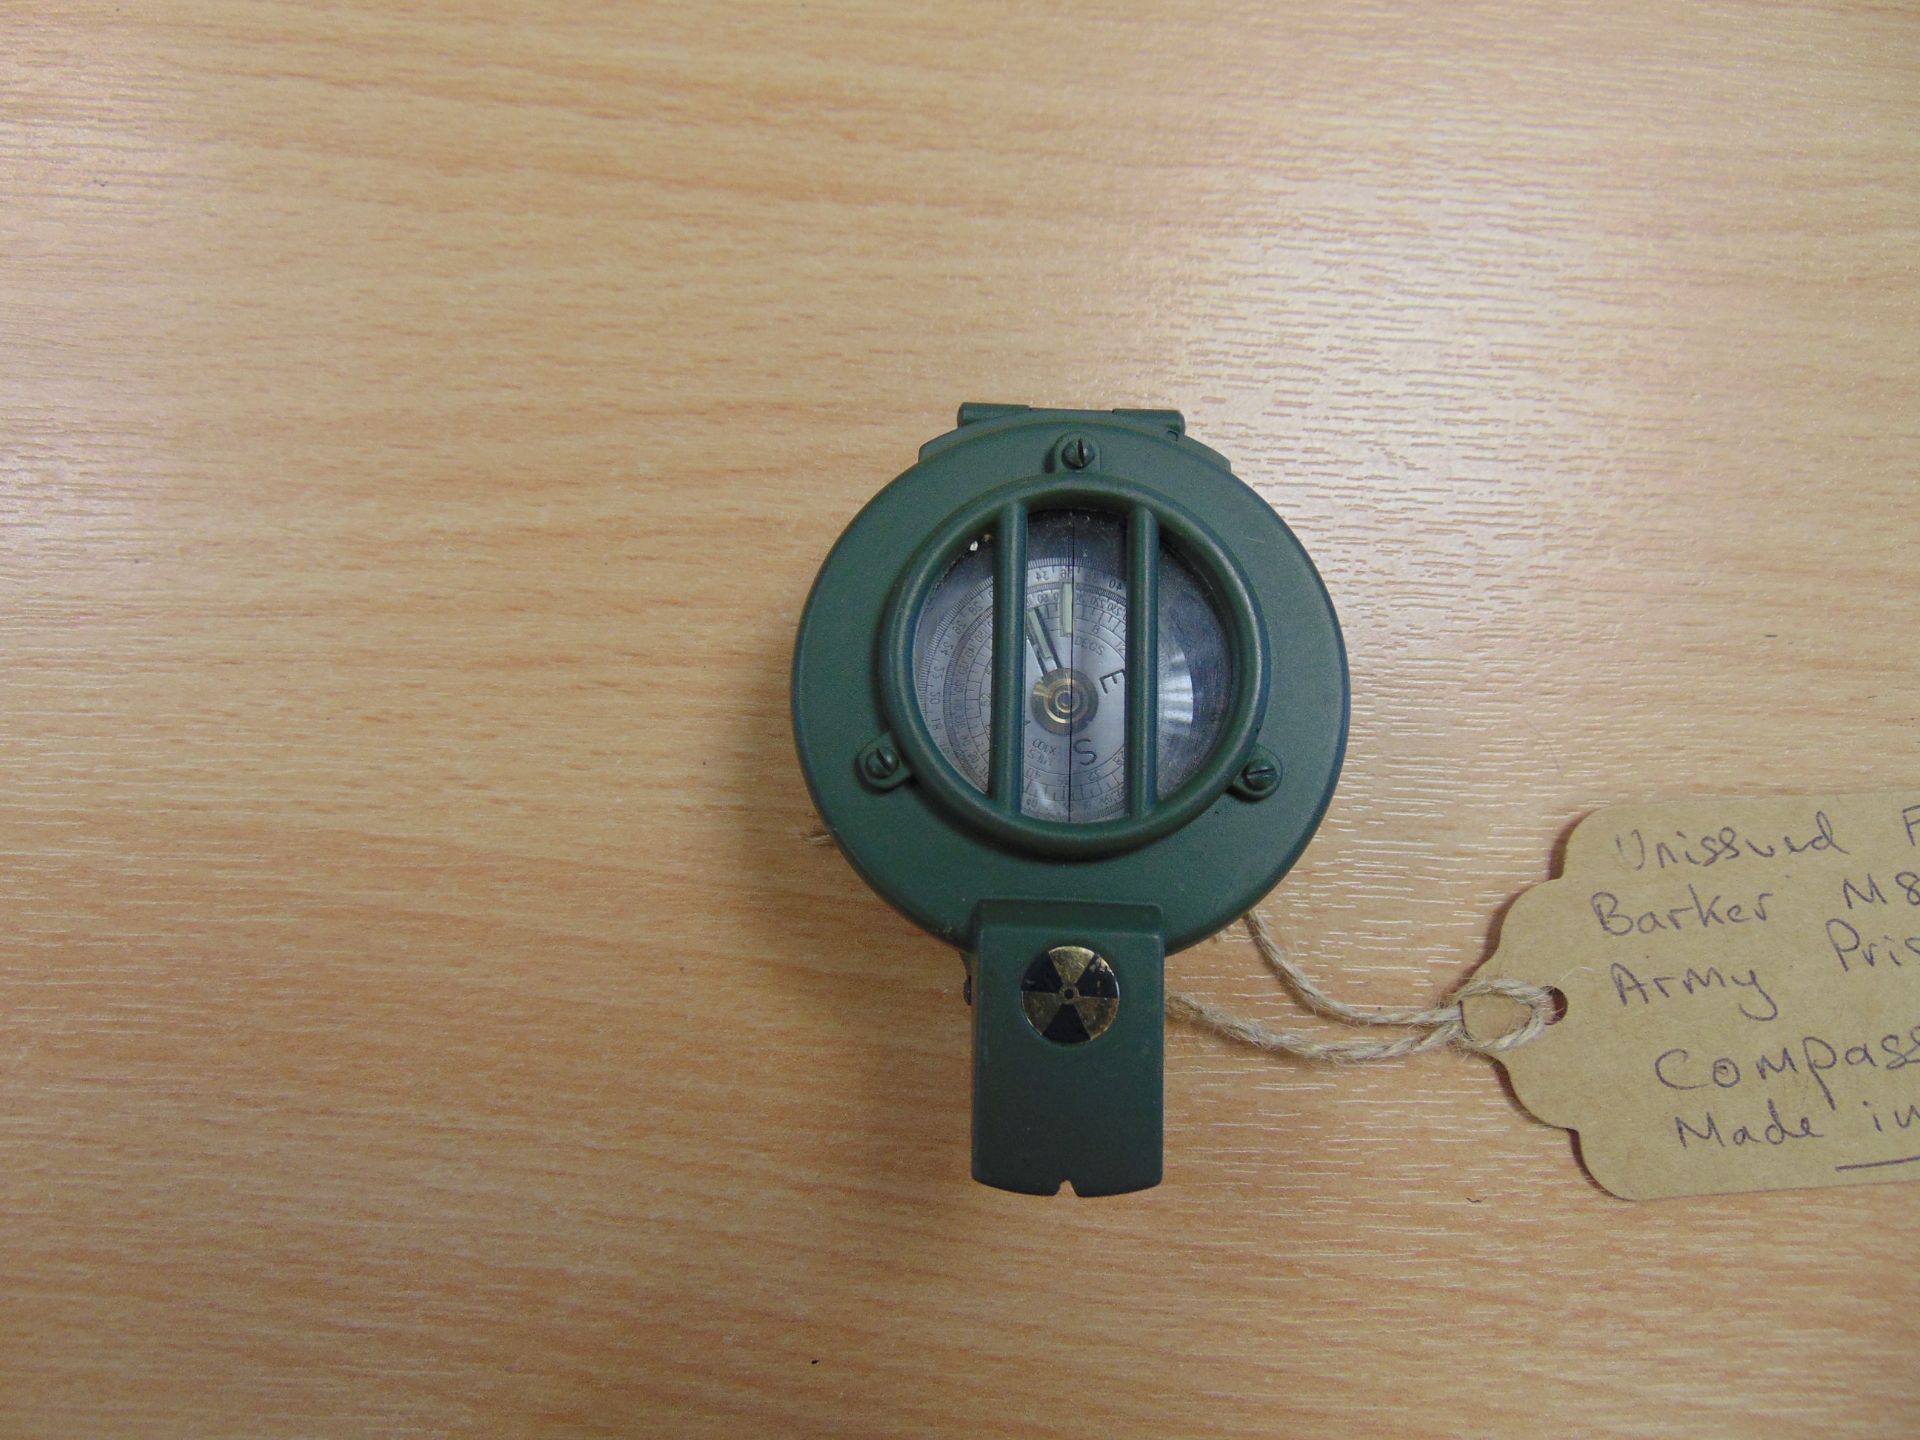 Unissued Francis Baker M88 British Army Prismatic Compass, Made in UK - Image 3 of 4